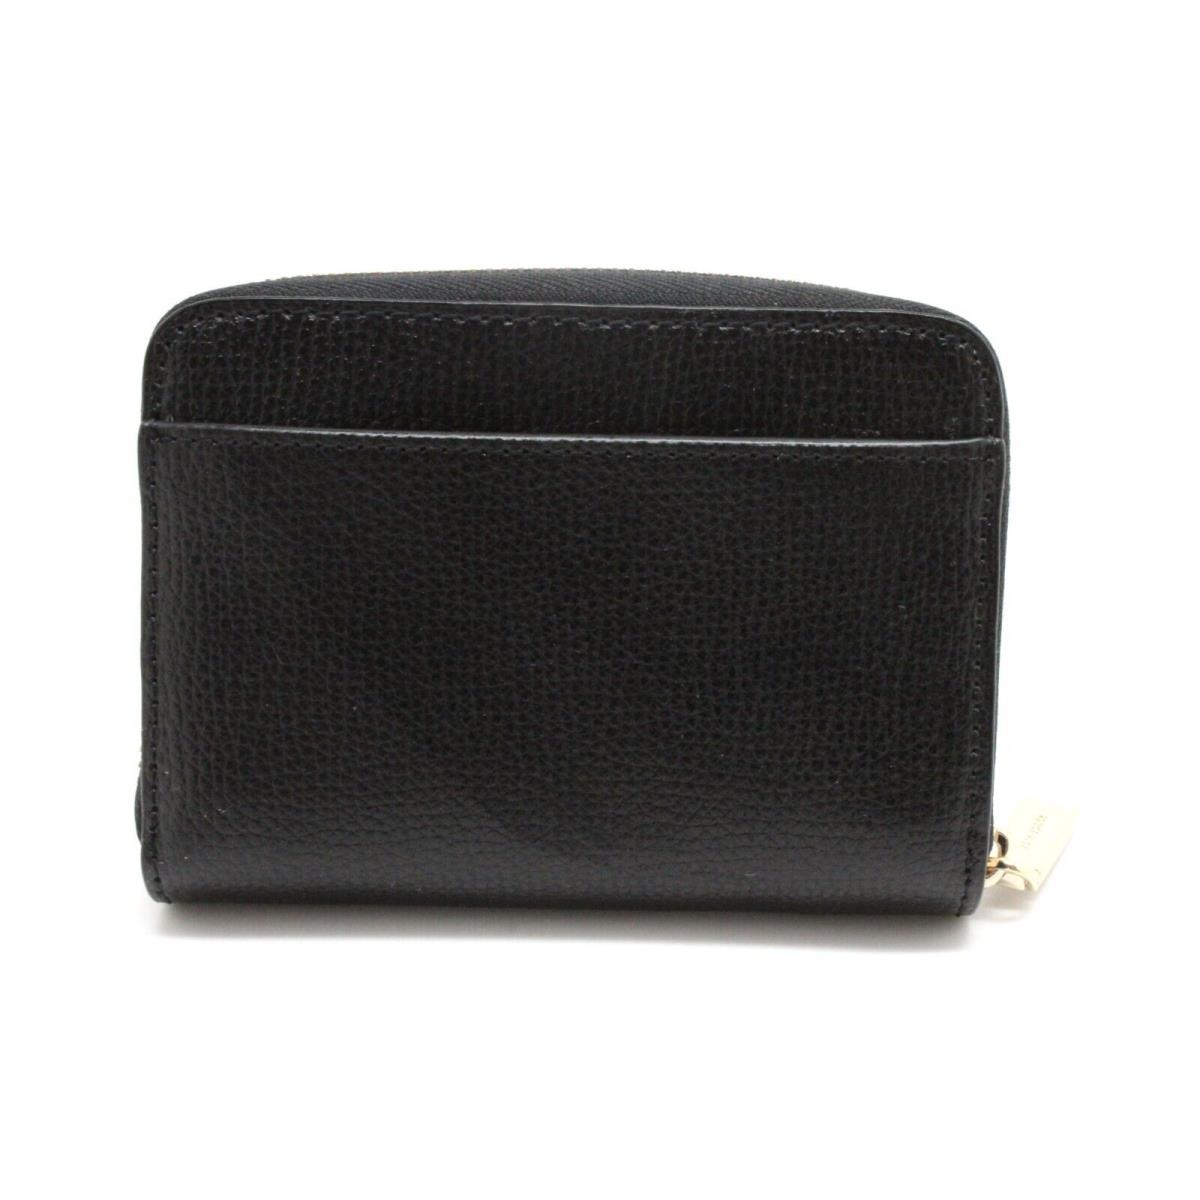 Kate Spade New York Darcy Small Zip Card Case Wallet in Black